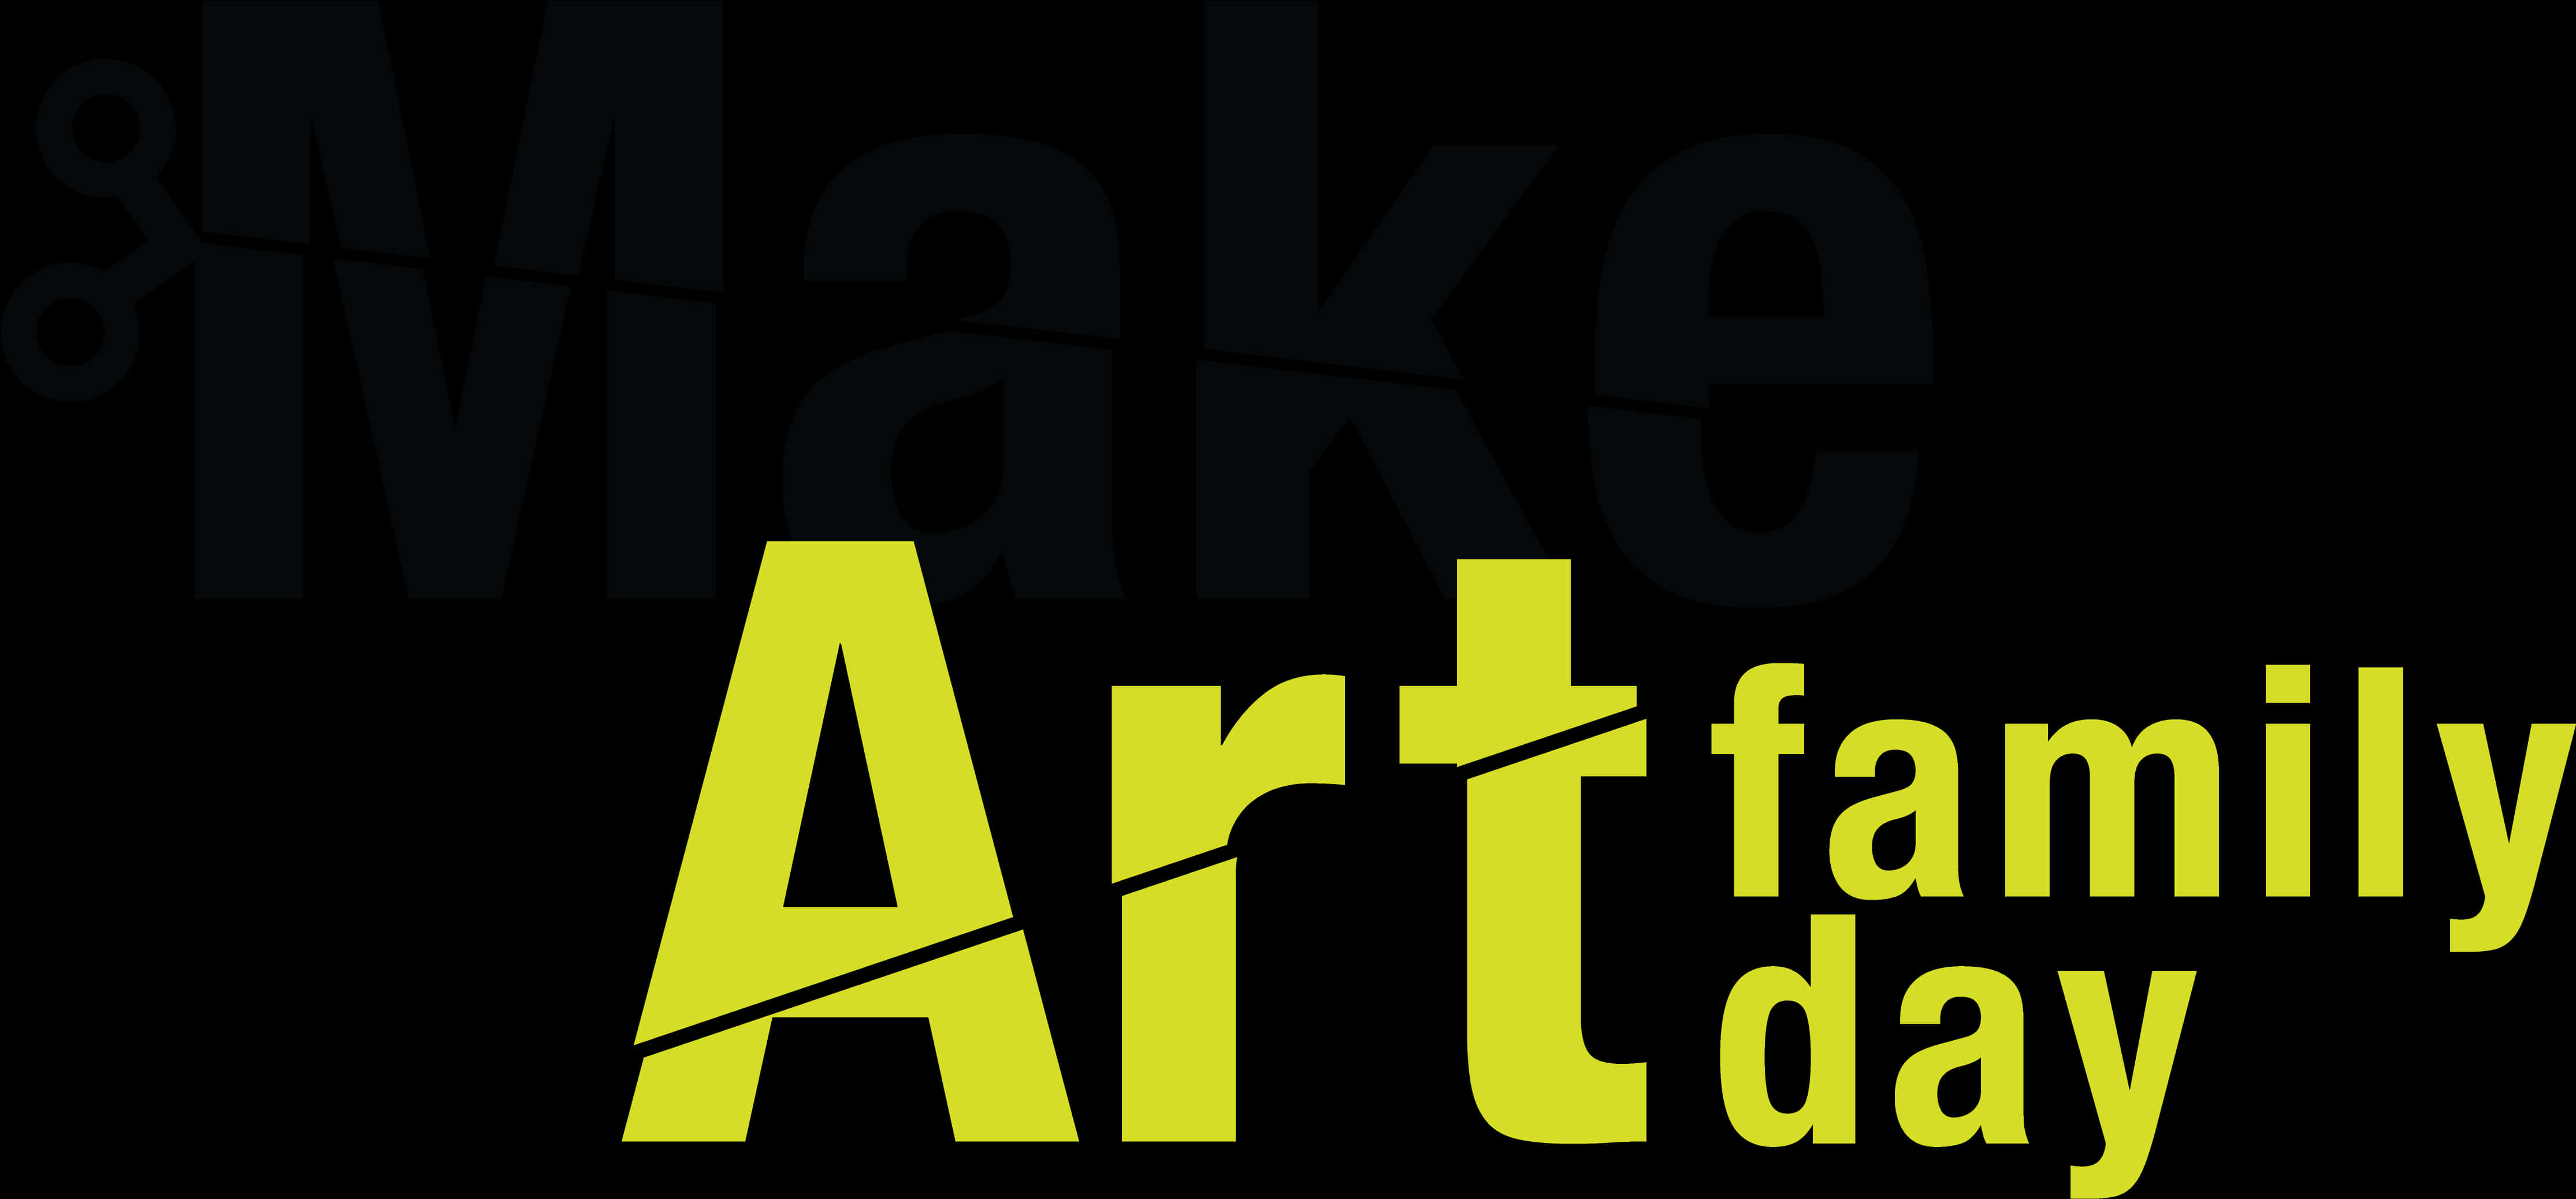 Make Art Family Day Graphic PNG image